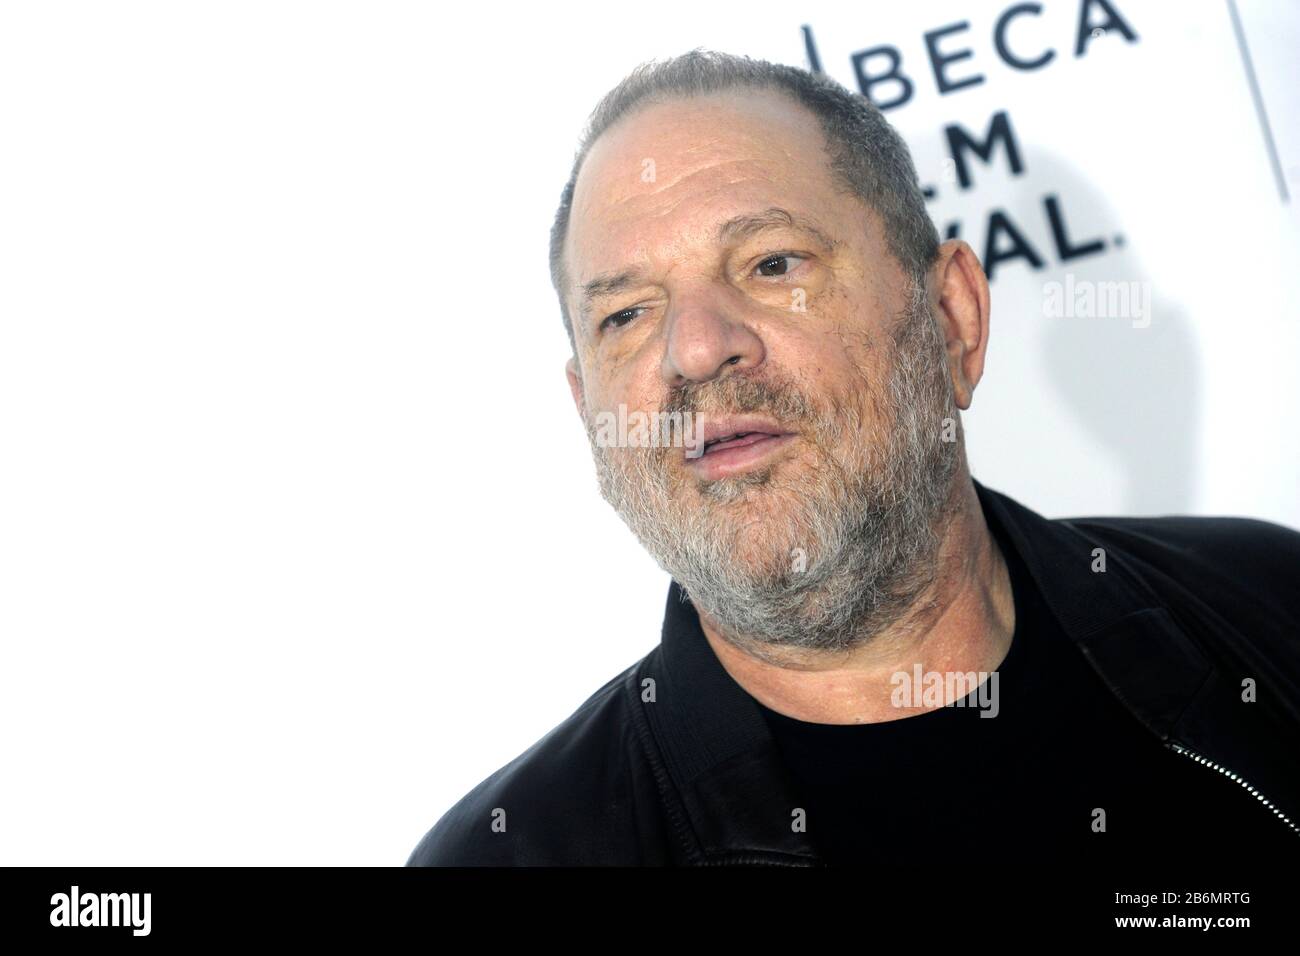 New York City. 28th Apr, 2017. Harvey Weinstein attends the 'Reservoir Dogs' 25th Anniversary Screening during 2017 Tribeca Film Festival at The Beacon Theater on April 28, 2017 in New York City. | usage worldwide Credit: dpa/Alamy Live News Stock Photo